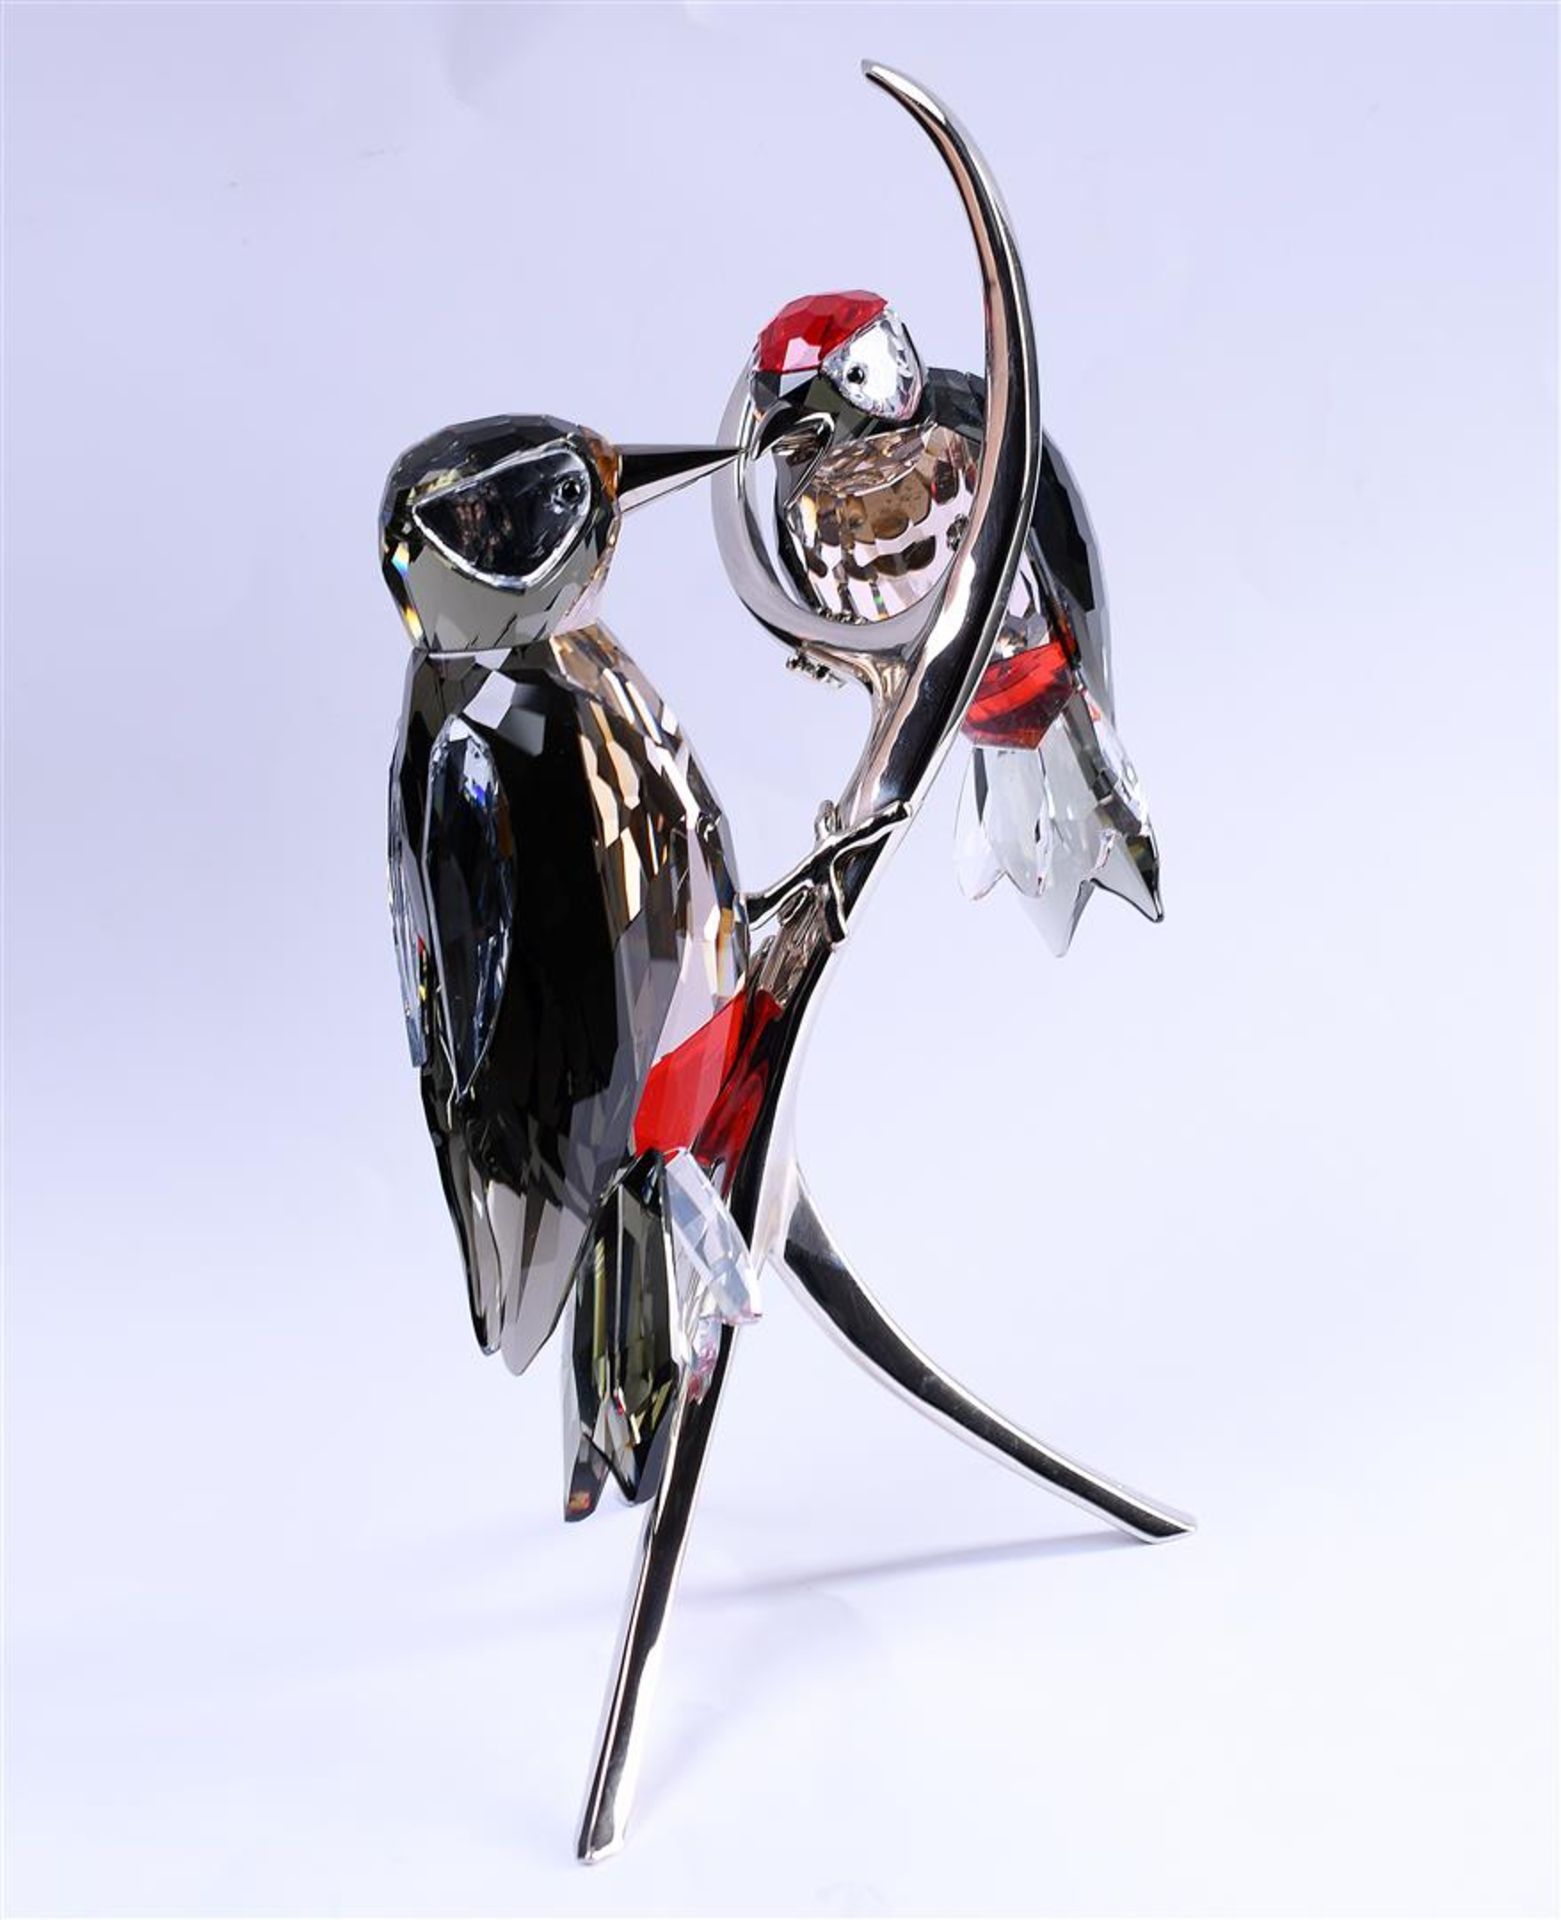 Swarovski, woodpeckers, Year of issue 2009,957562. Includes original box.
H. 21,9 cm. - Image 5 of 9